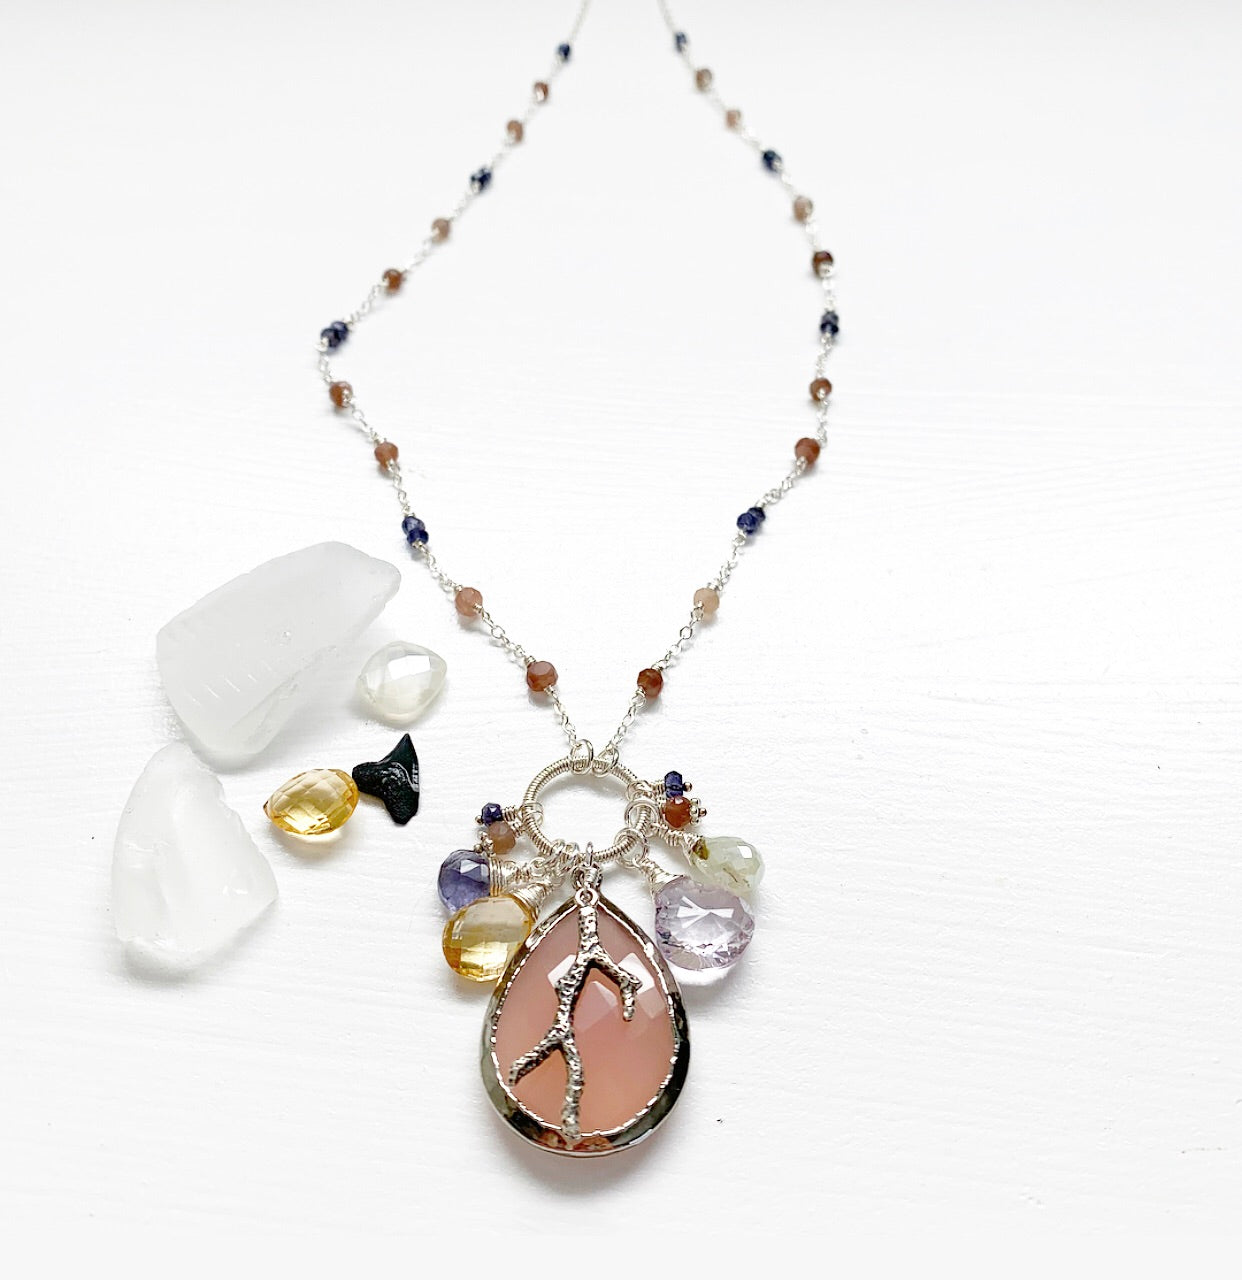 660-One of a Kind Gemstone Drop Necklace